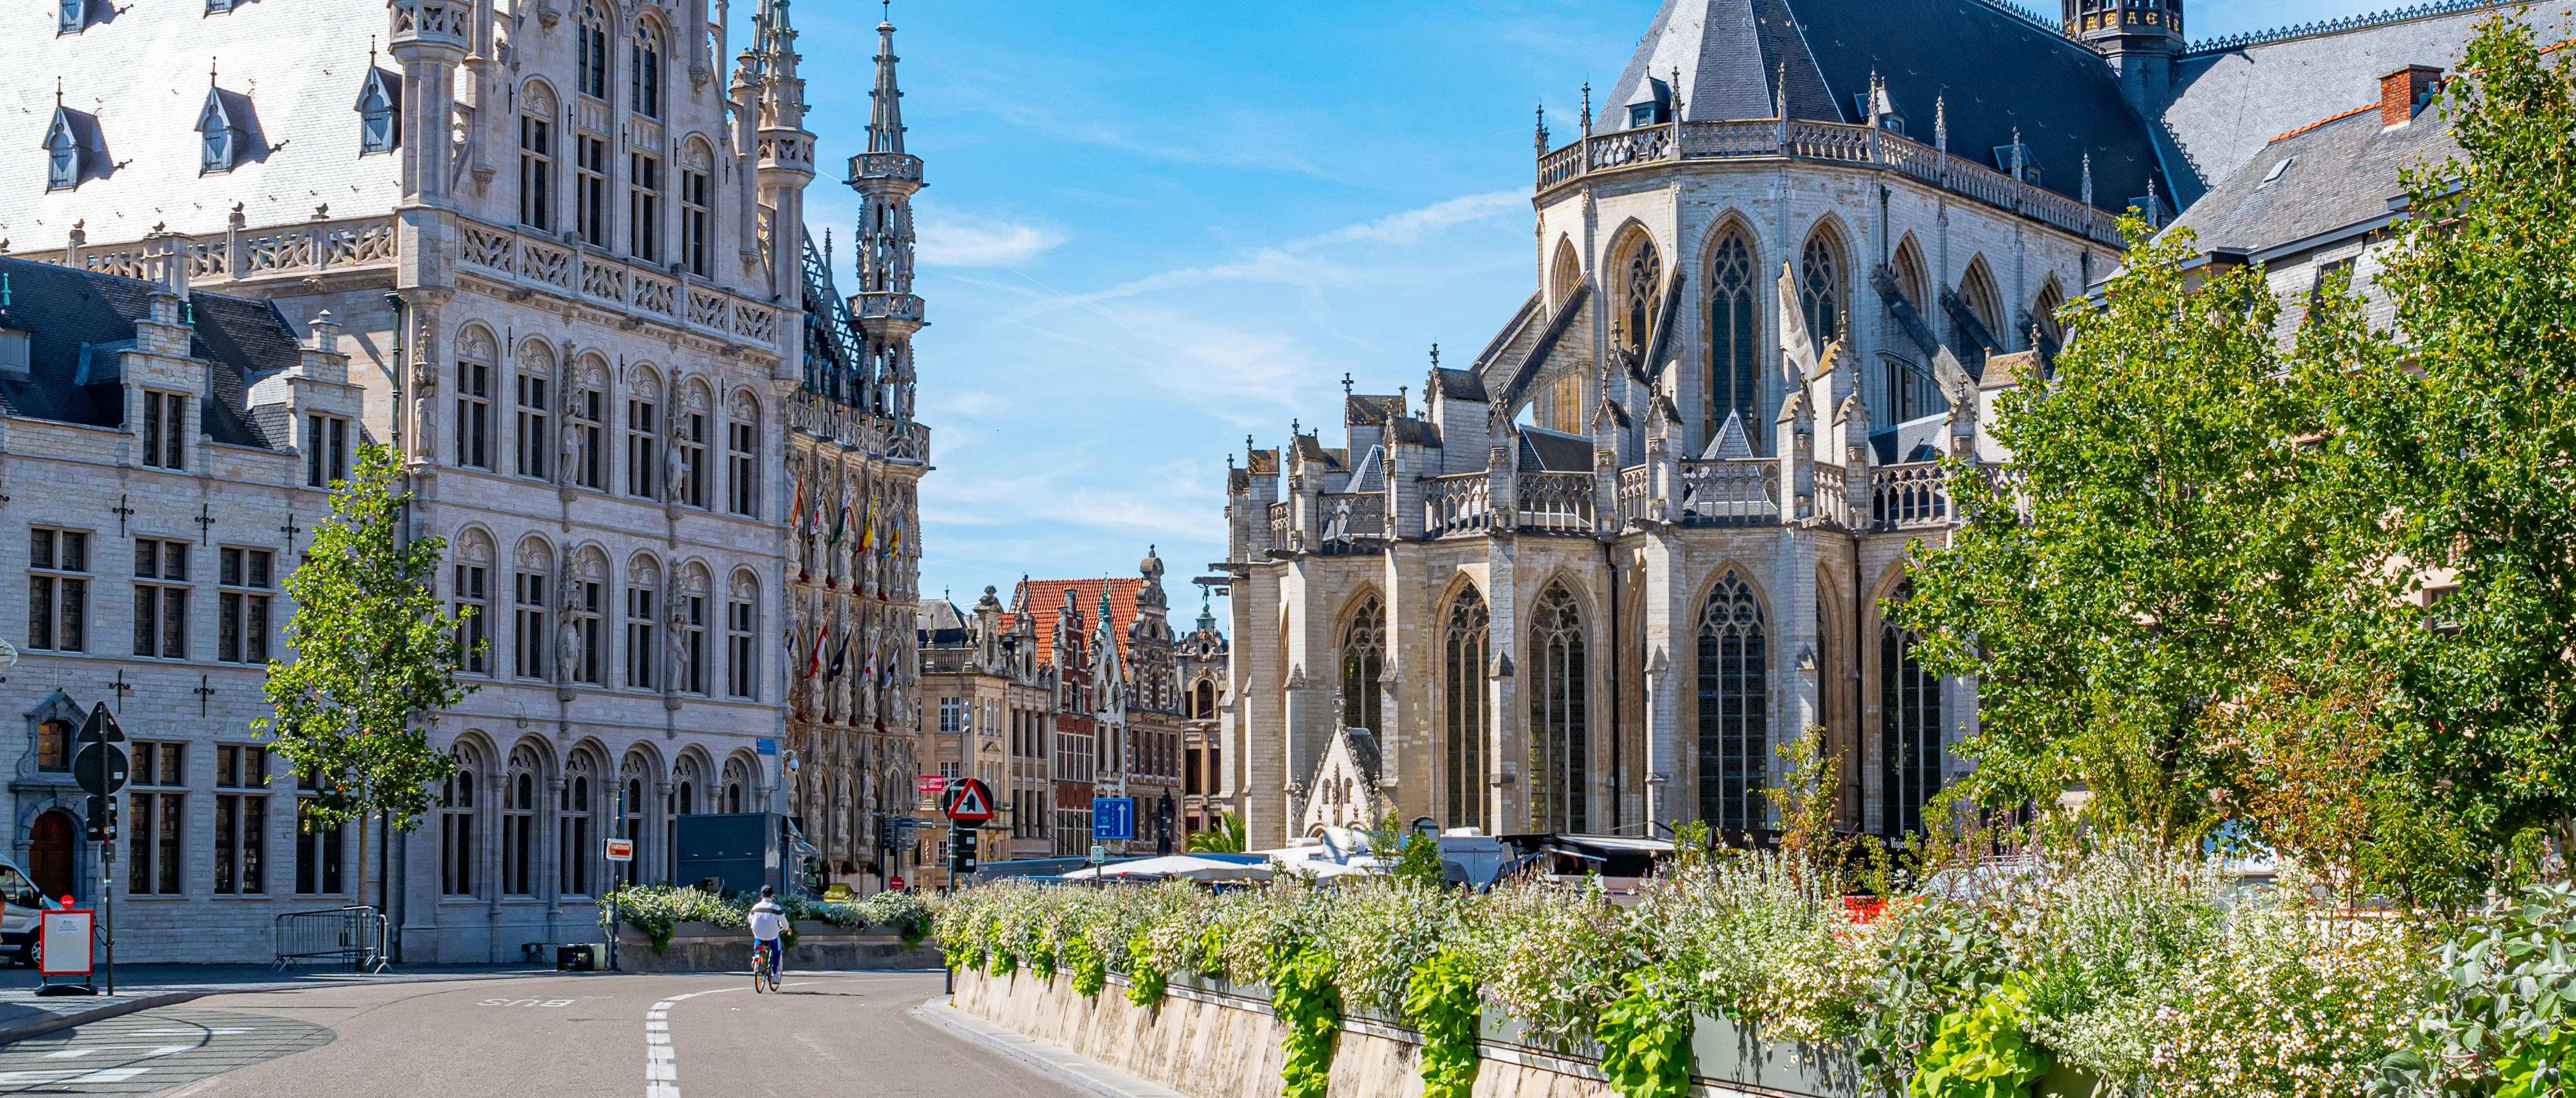 Self guided tour with interactive city game of Leuven